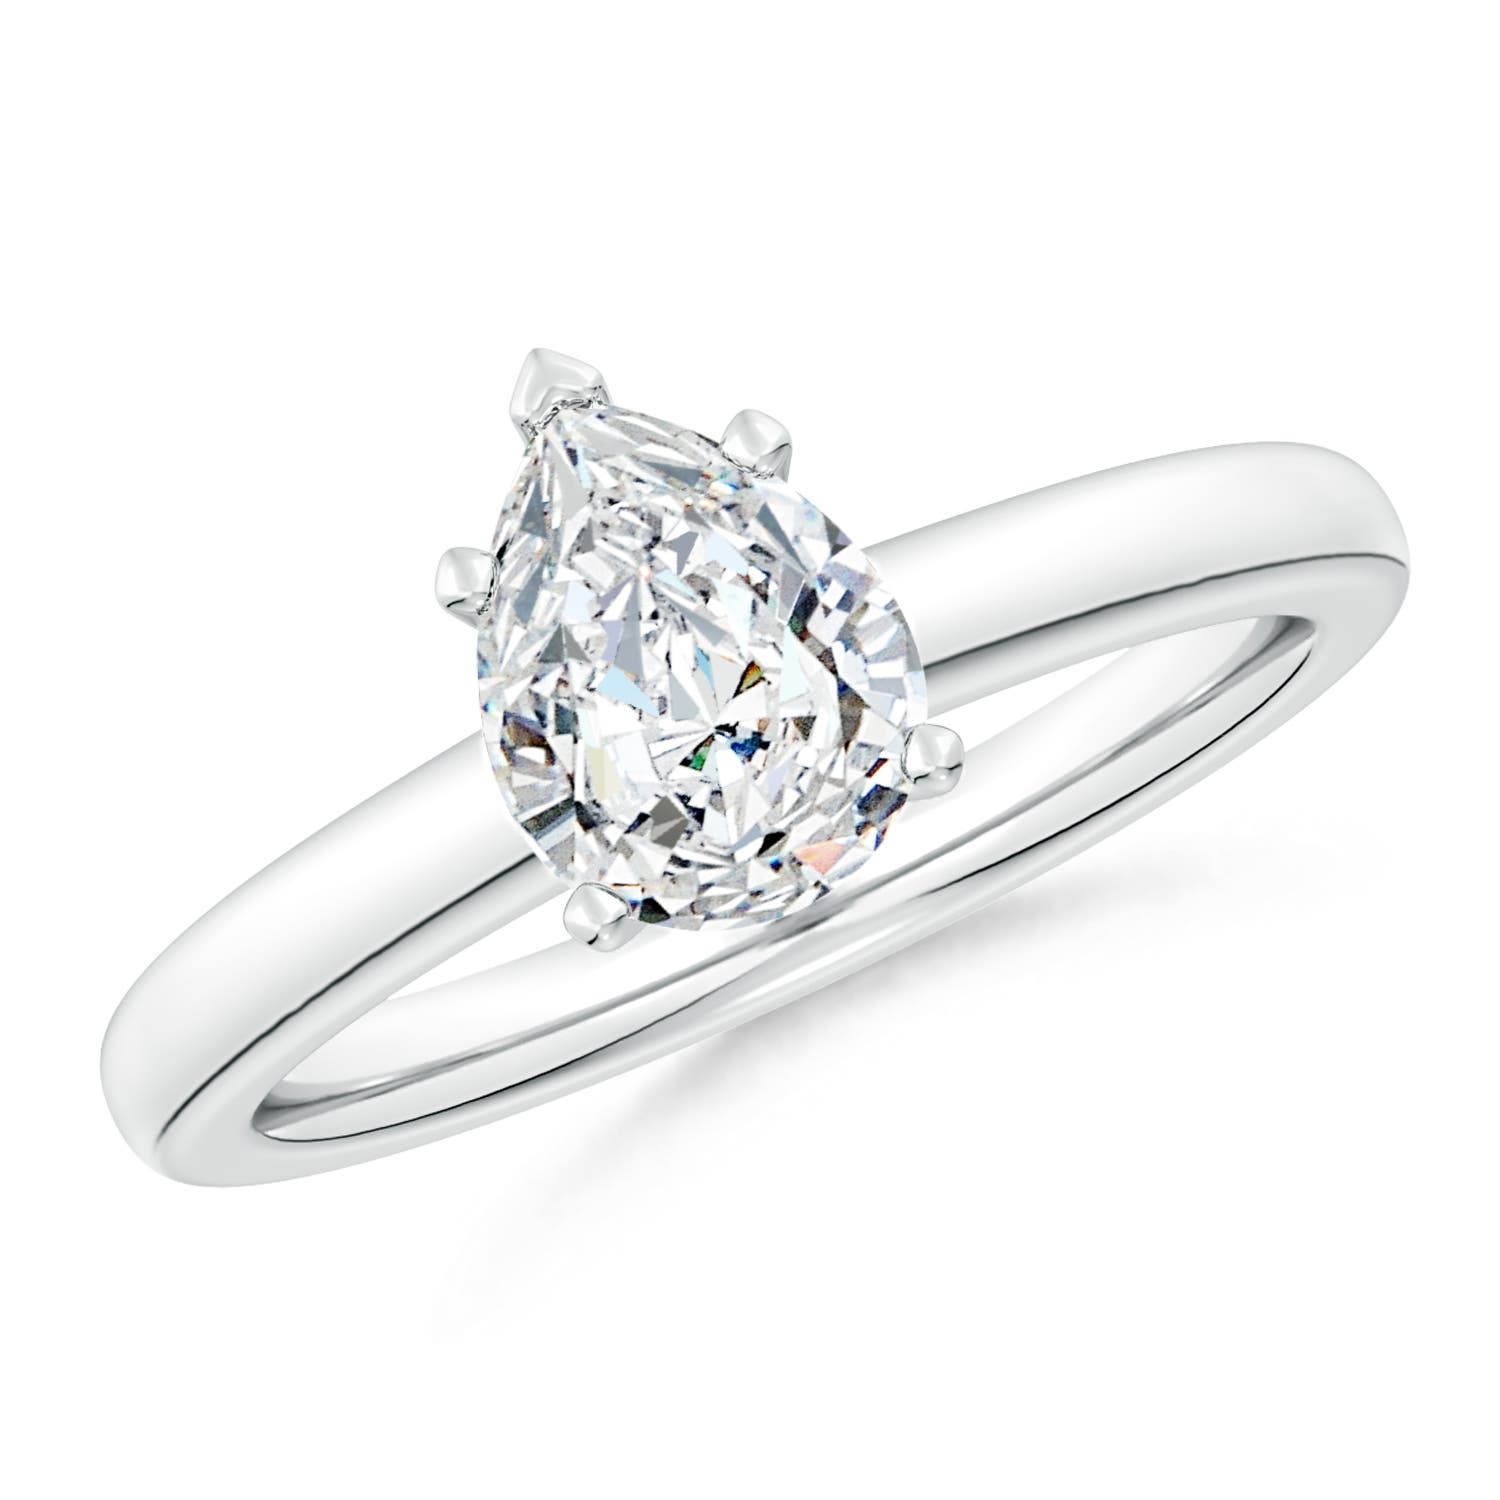 Tiffany and Co. Overpay? : r/EngagementRings